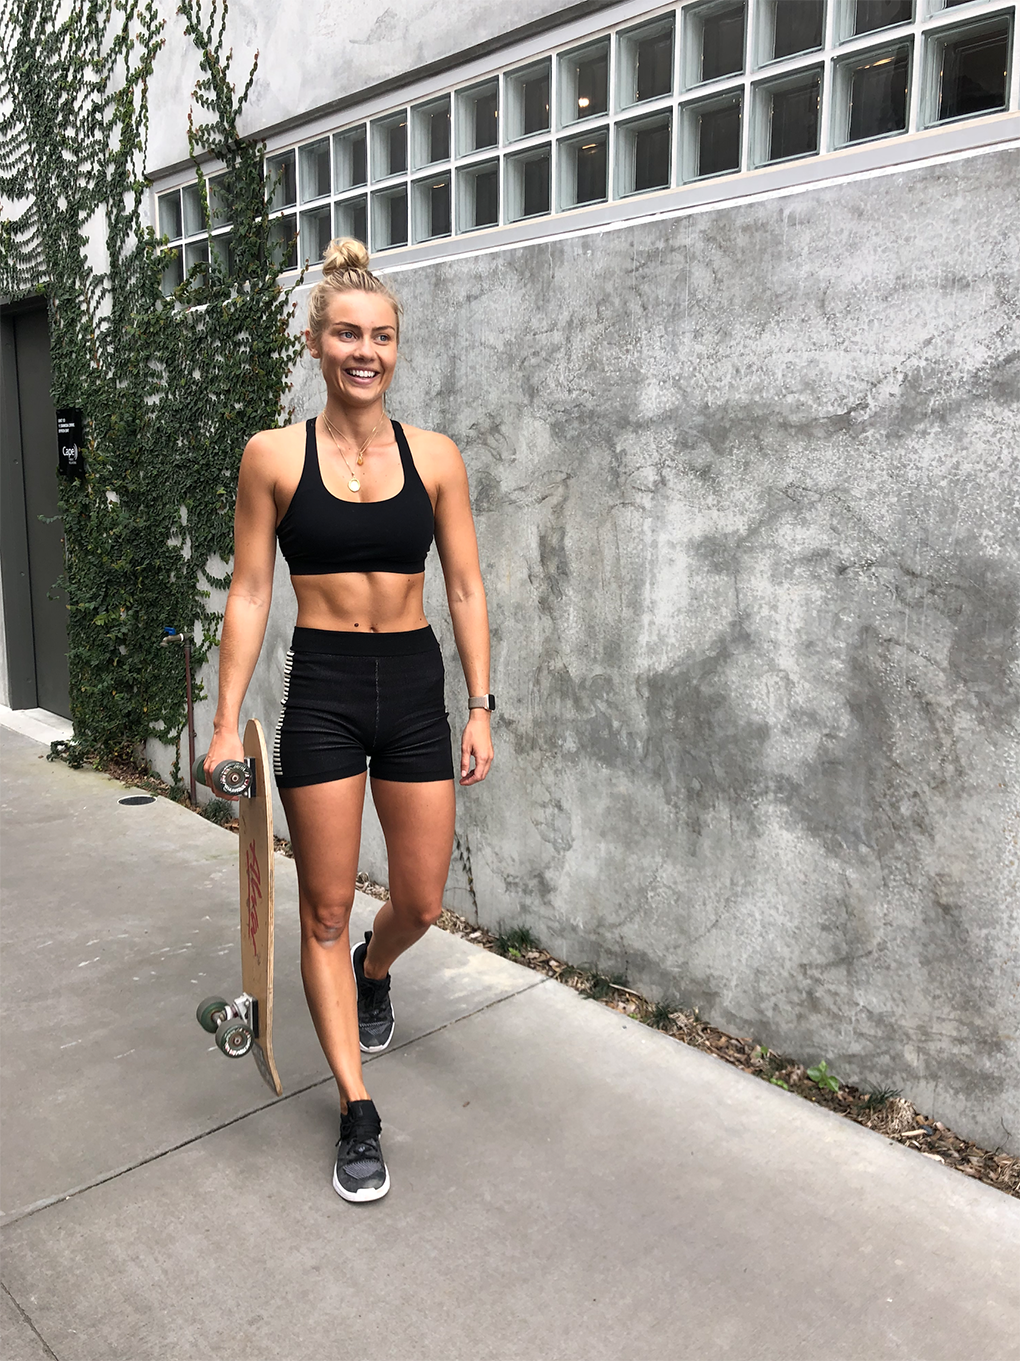 ELYSE KNOWLES SKATEBOARD WORKOUT OCT 2019 3.png